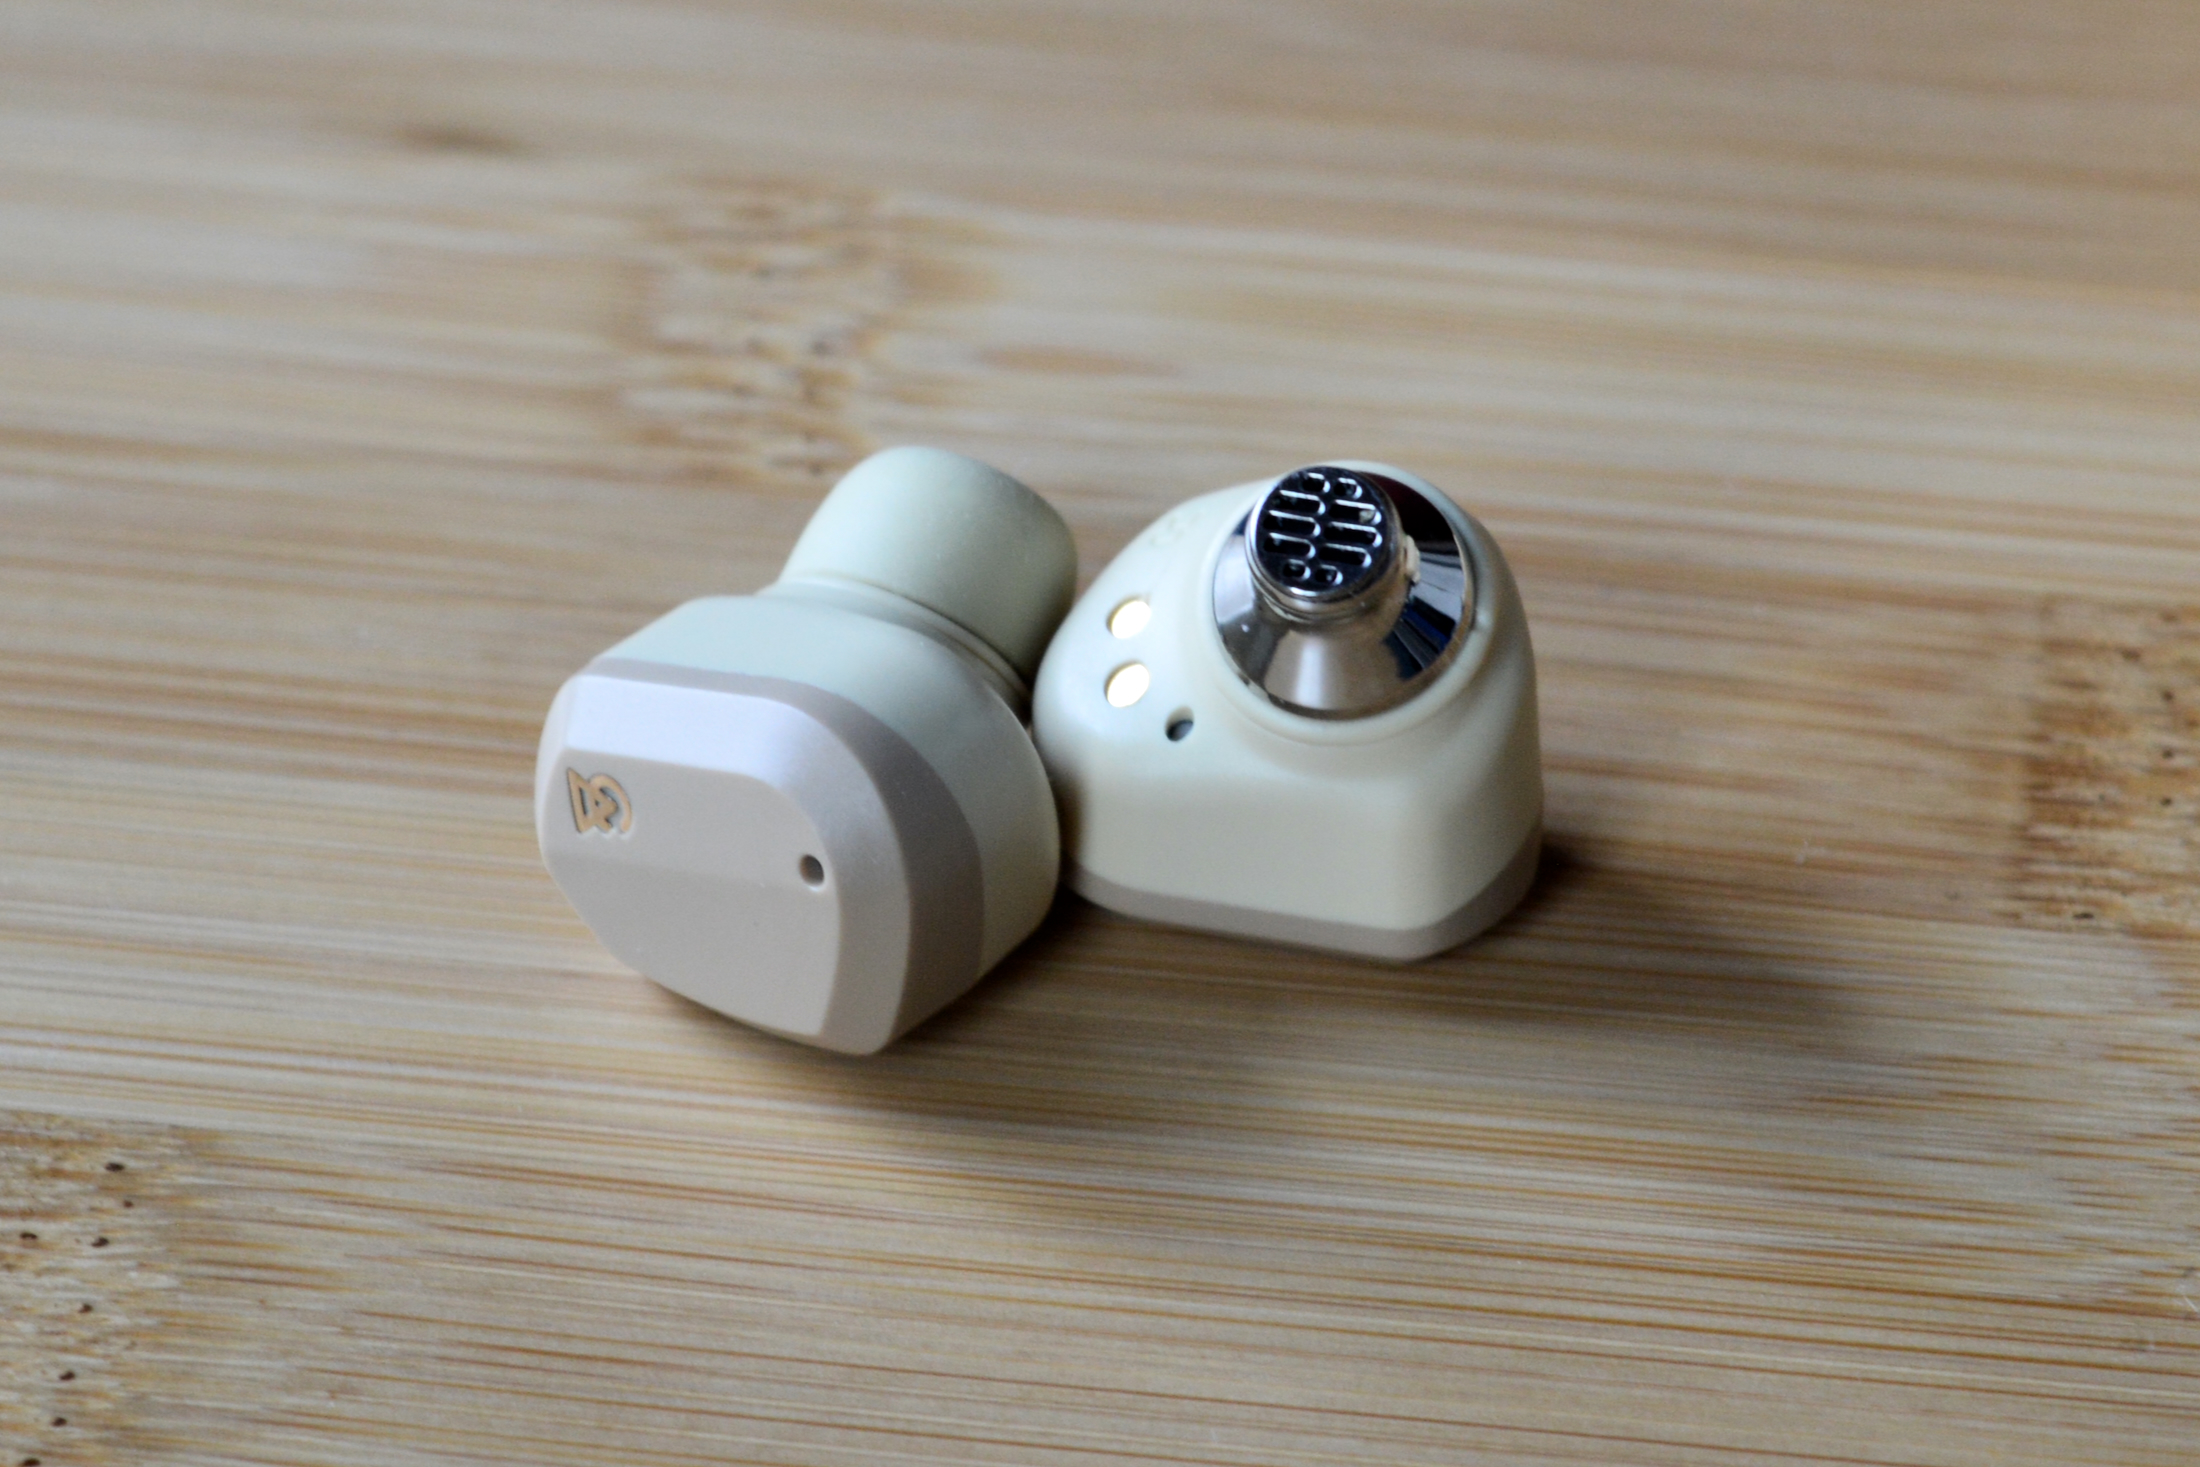 Campfire Audio Orbit review: out of this world sound | Digital Trends